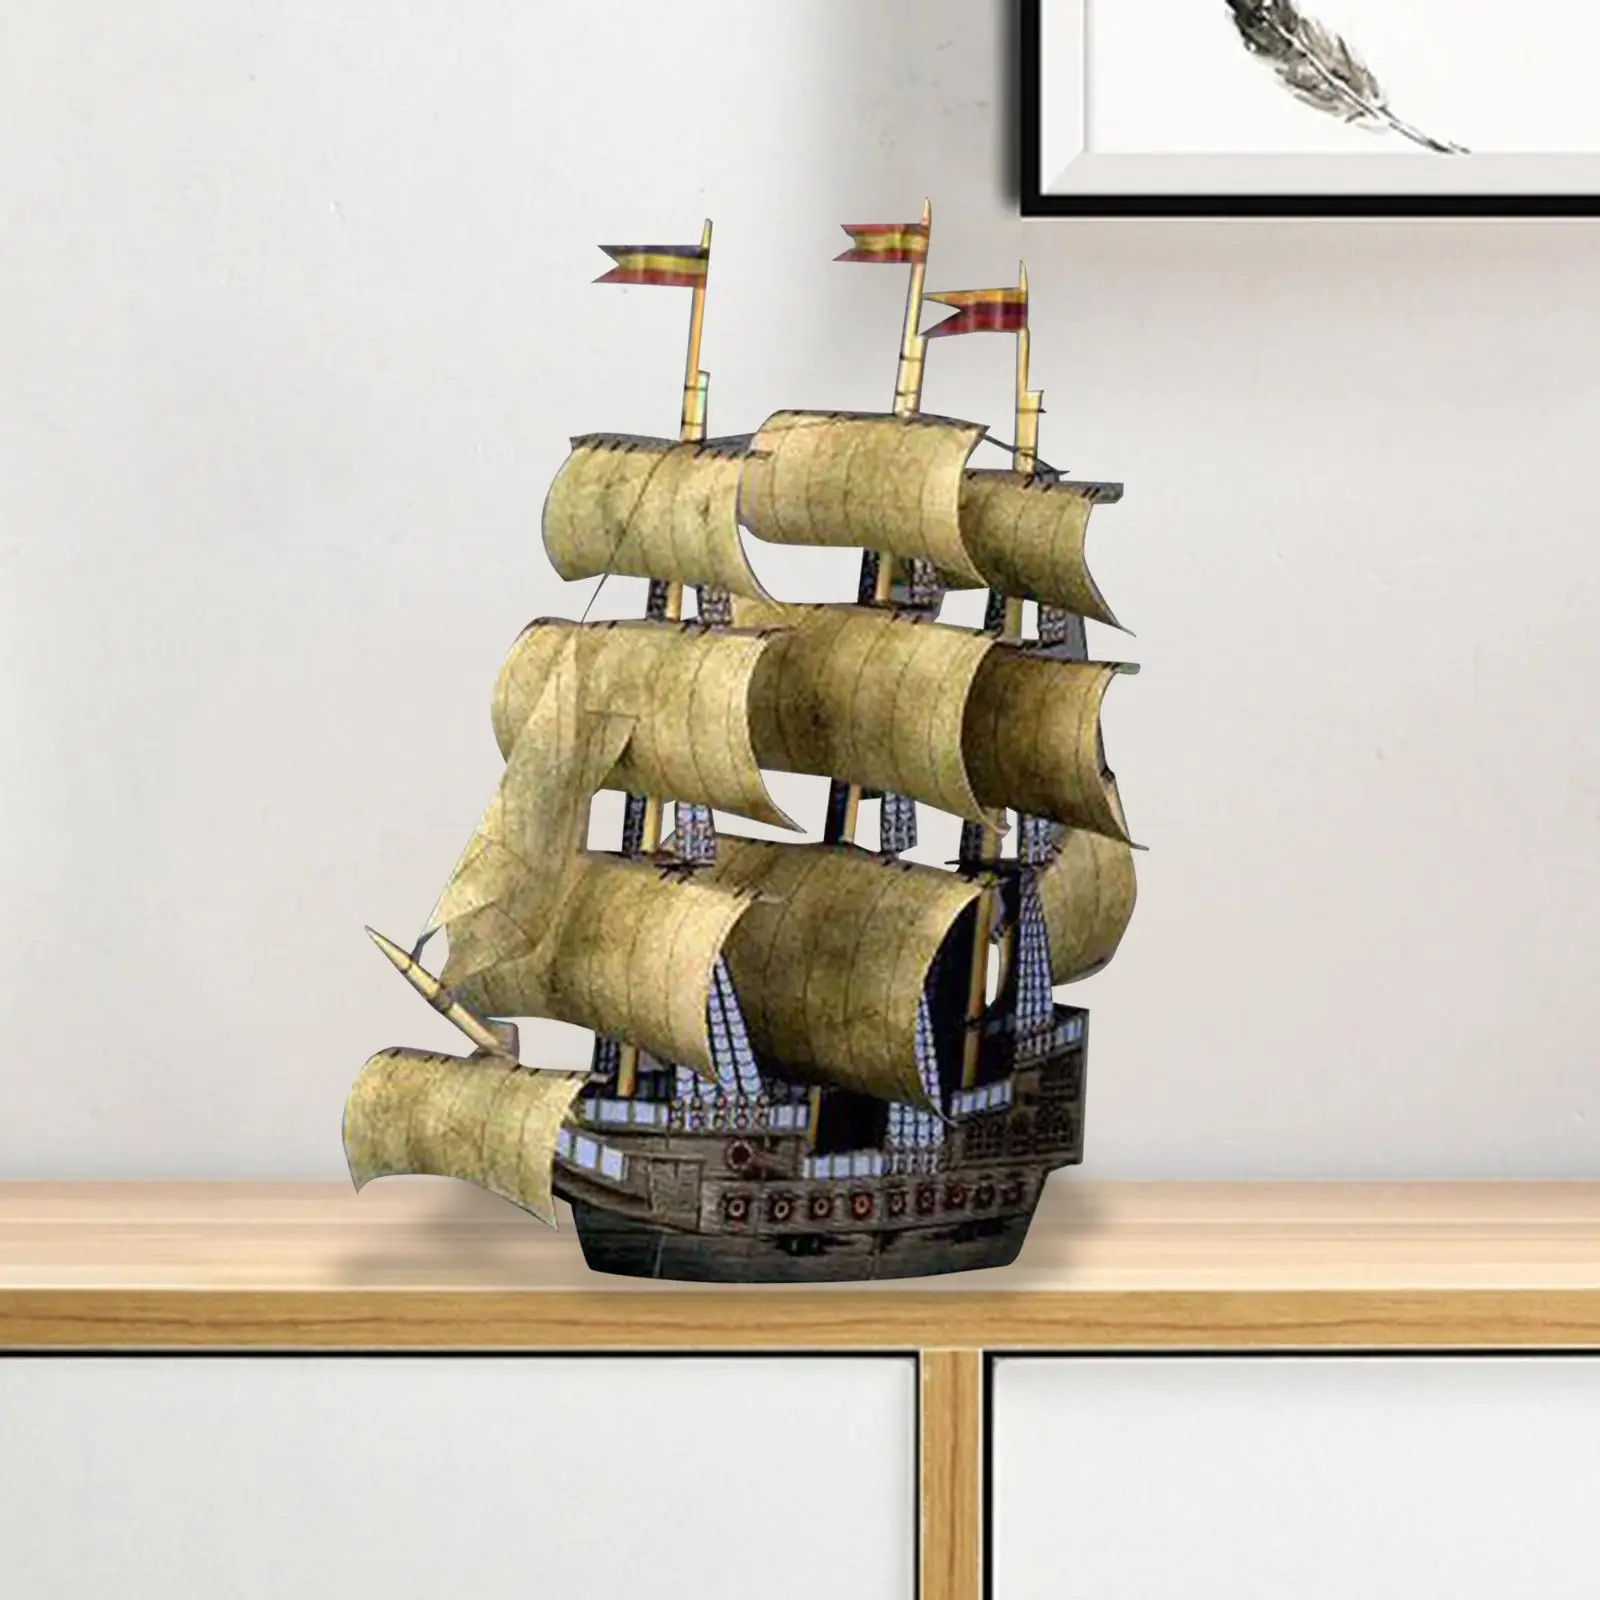 Sailing Boats Scale Model Brain Teaser Puzzle DIY Assemble Toy Vintage Style Sailing Ship Model Kits 1/250 for Kids Adults Gift